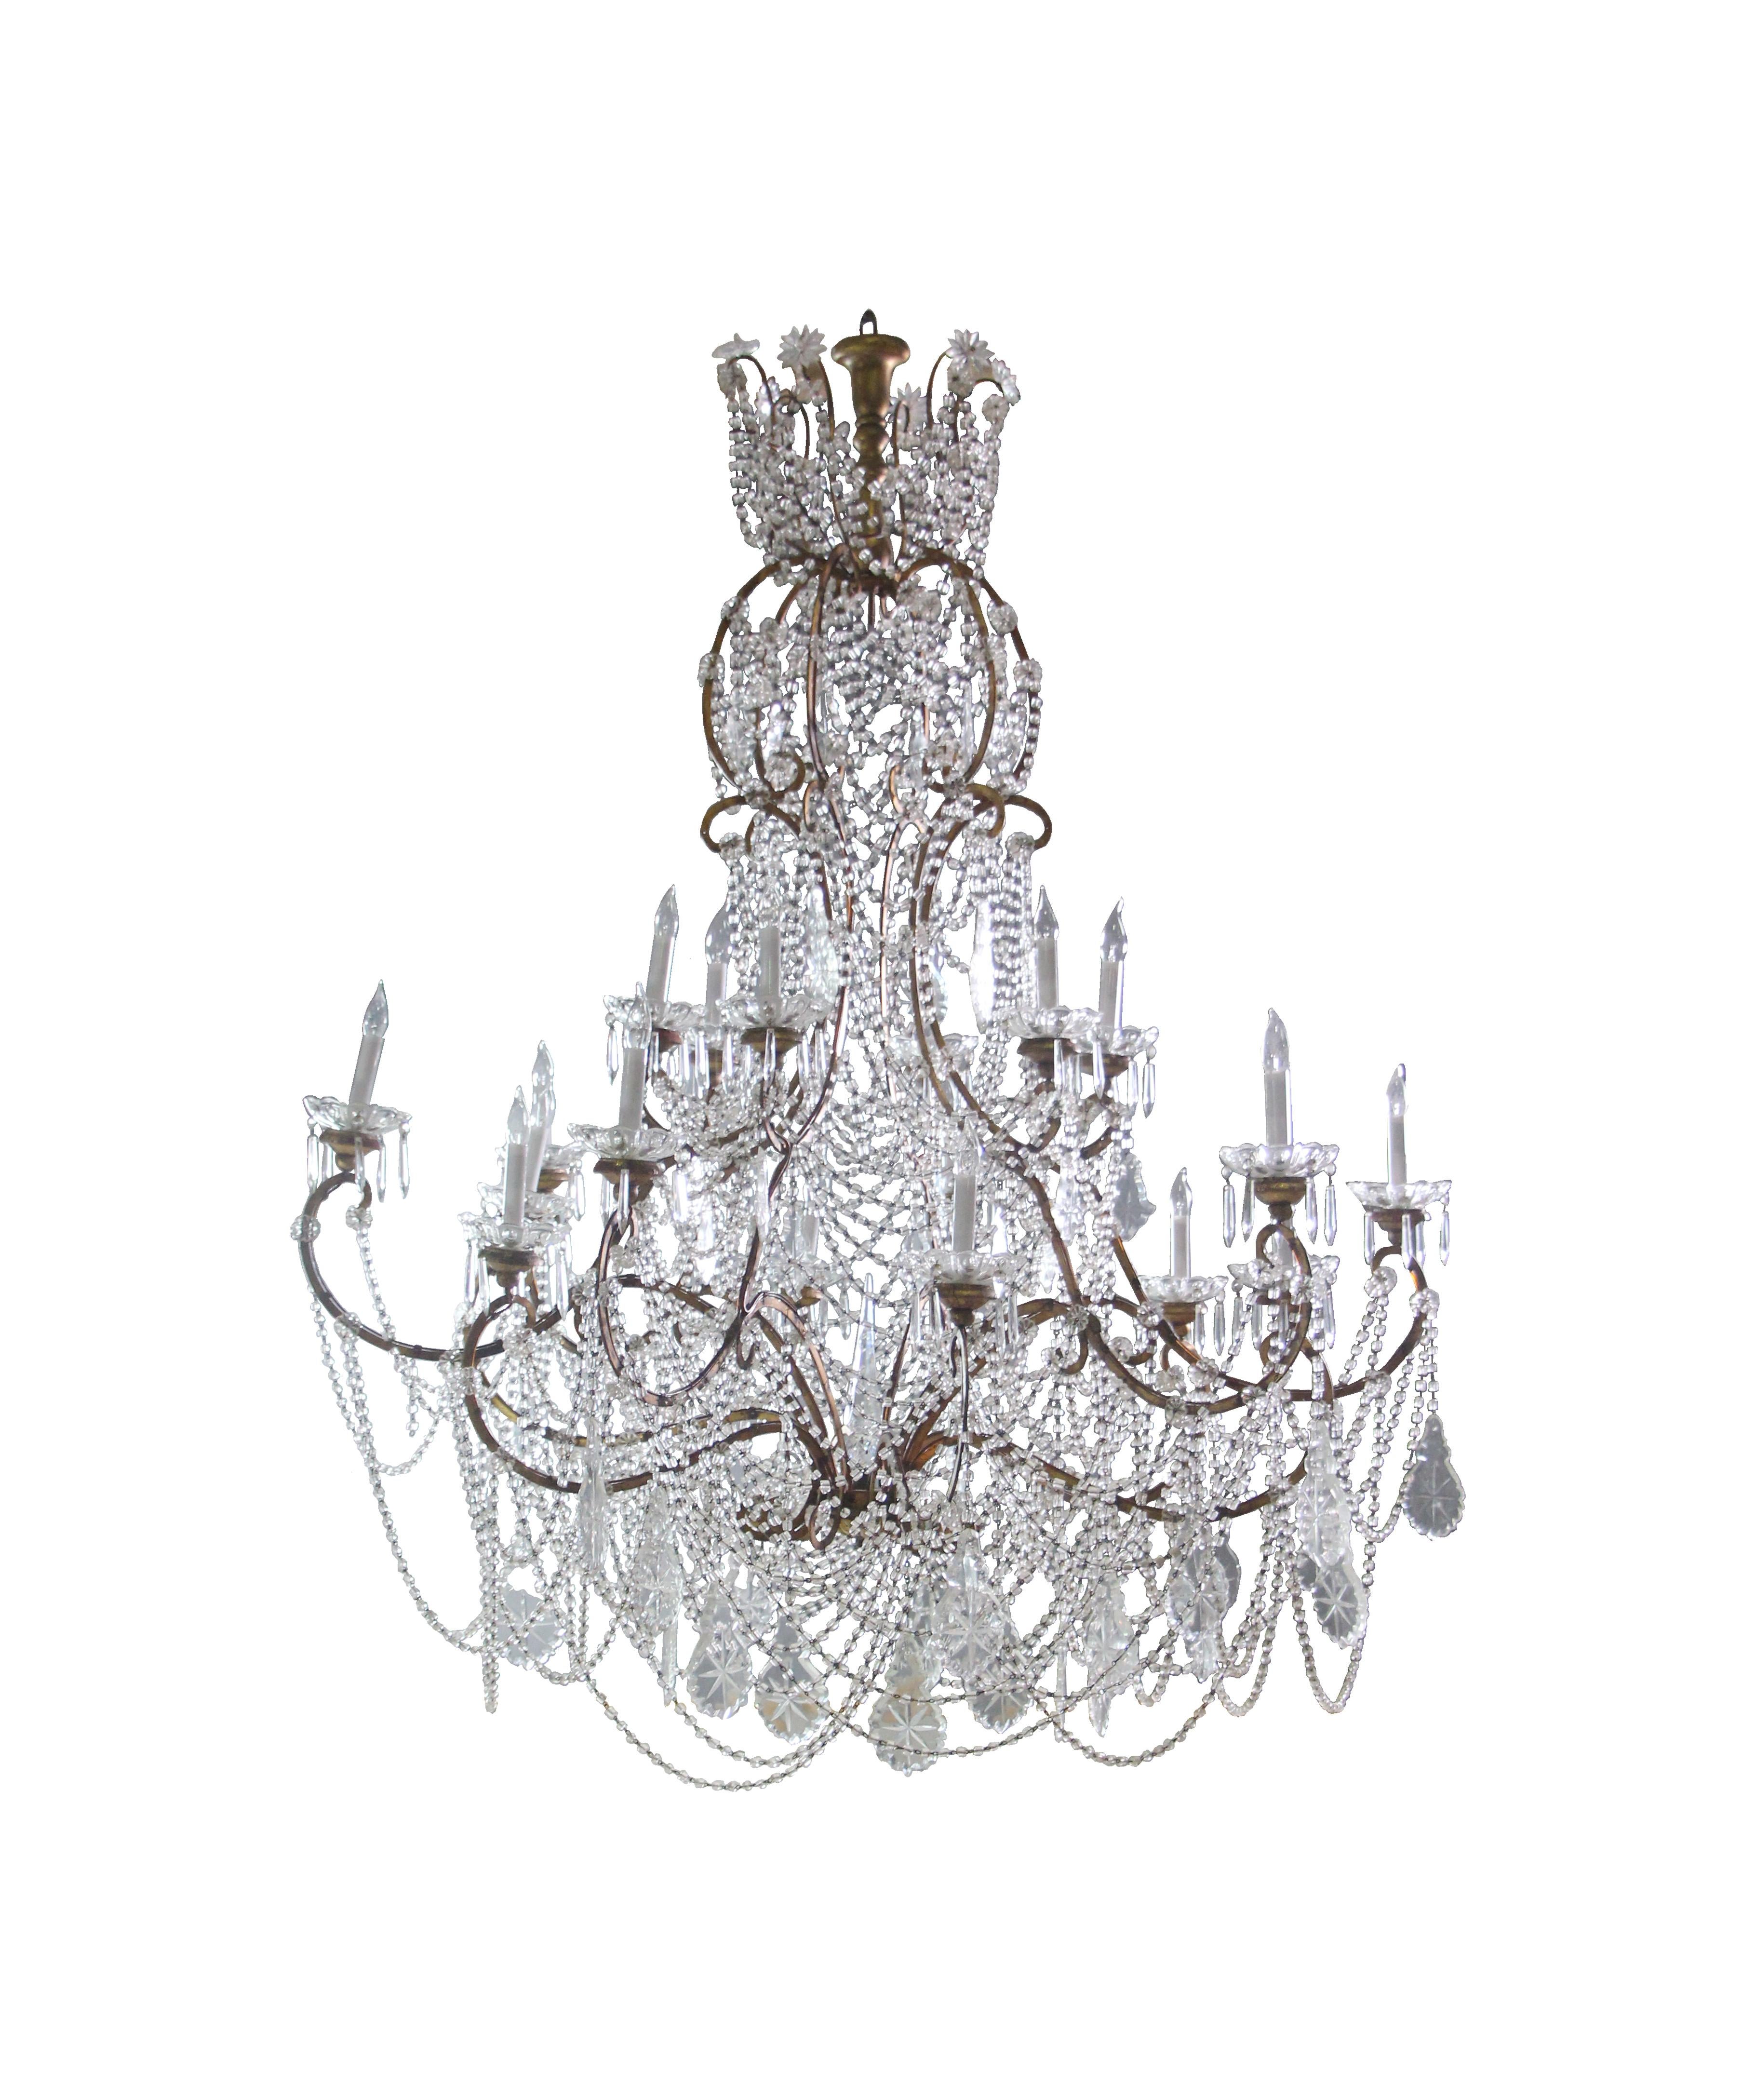 Stunning 1960's Italian crystal chandelier recovered from one of Brooklyn, New York's most prestigious ballroom and entertainment halls; The Grand Prospect Hall, formally located on Prospect Avenue. It has an elegant style with 18 lights